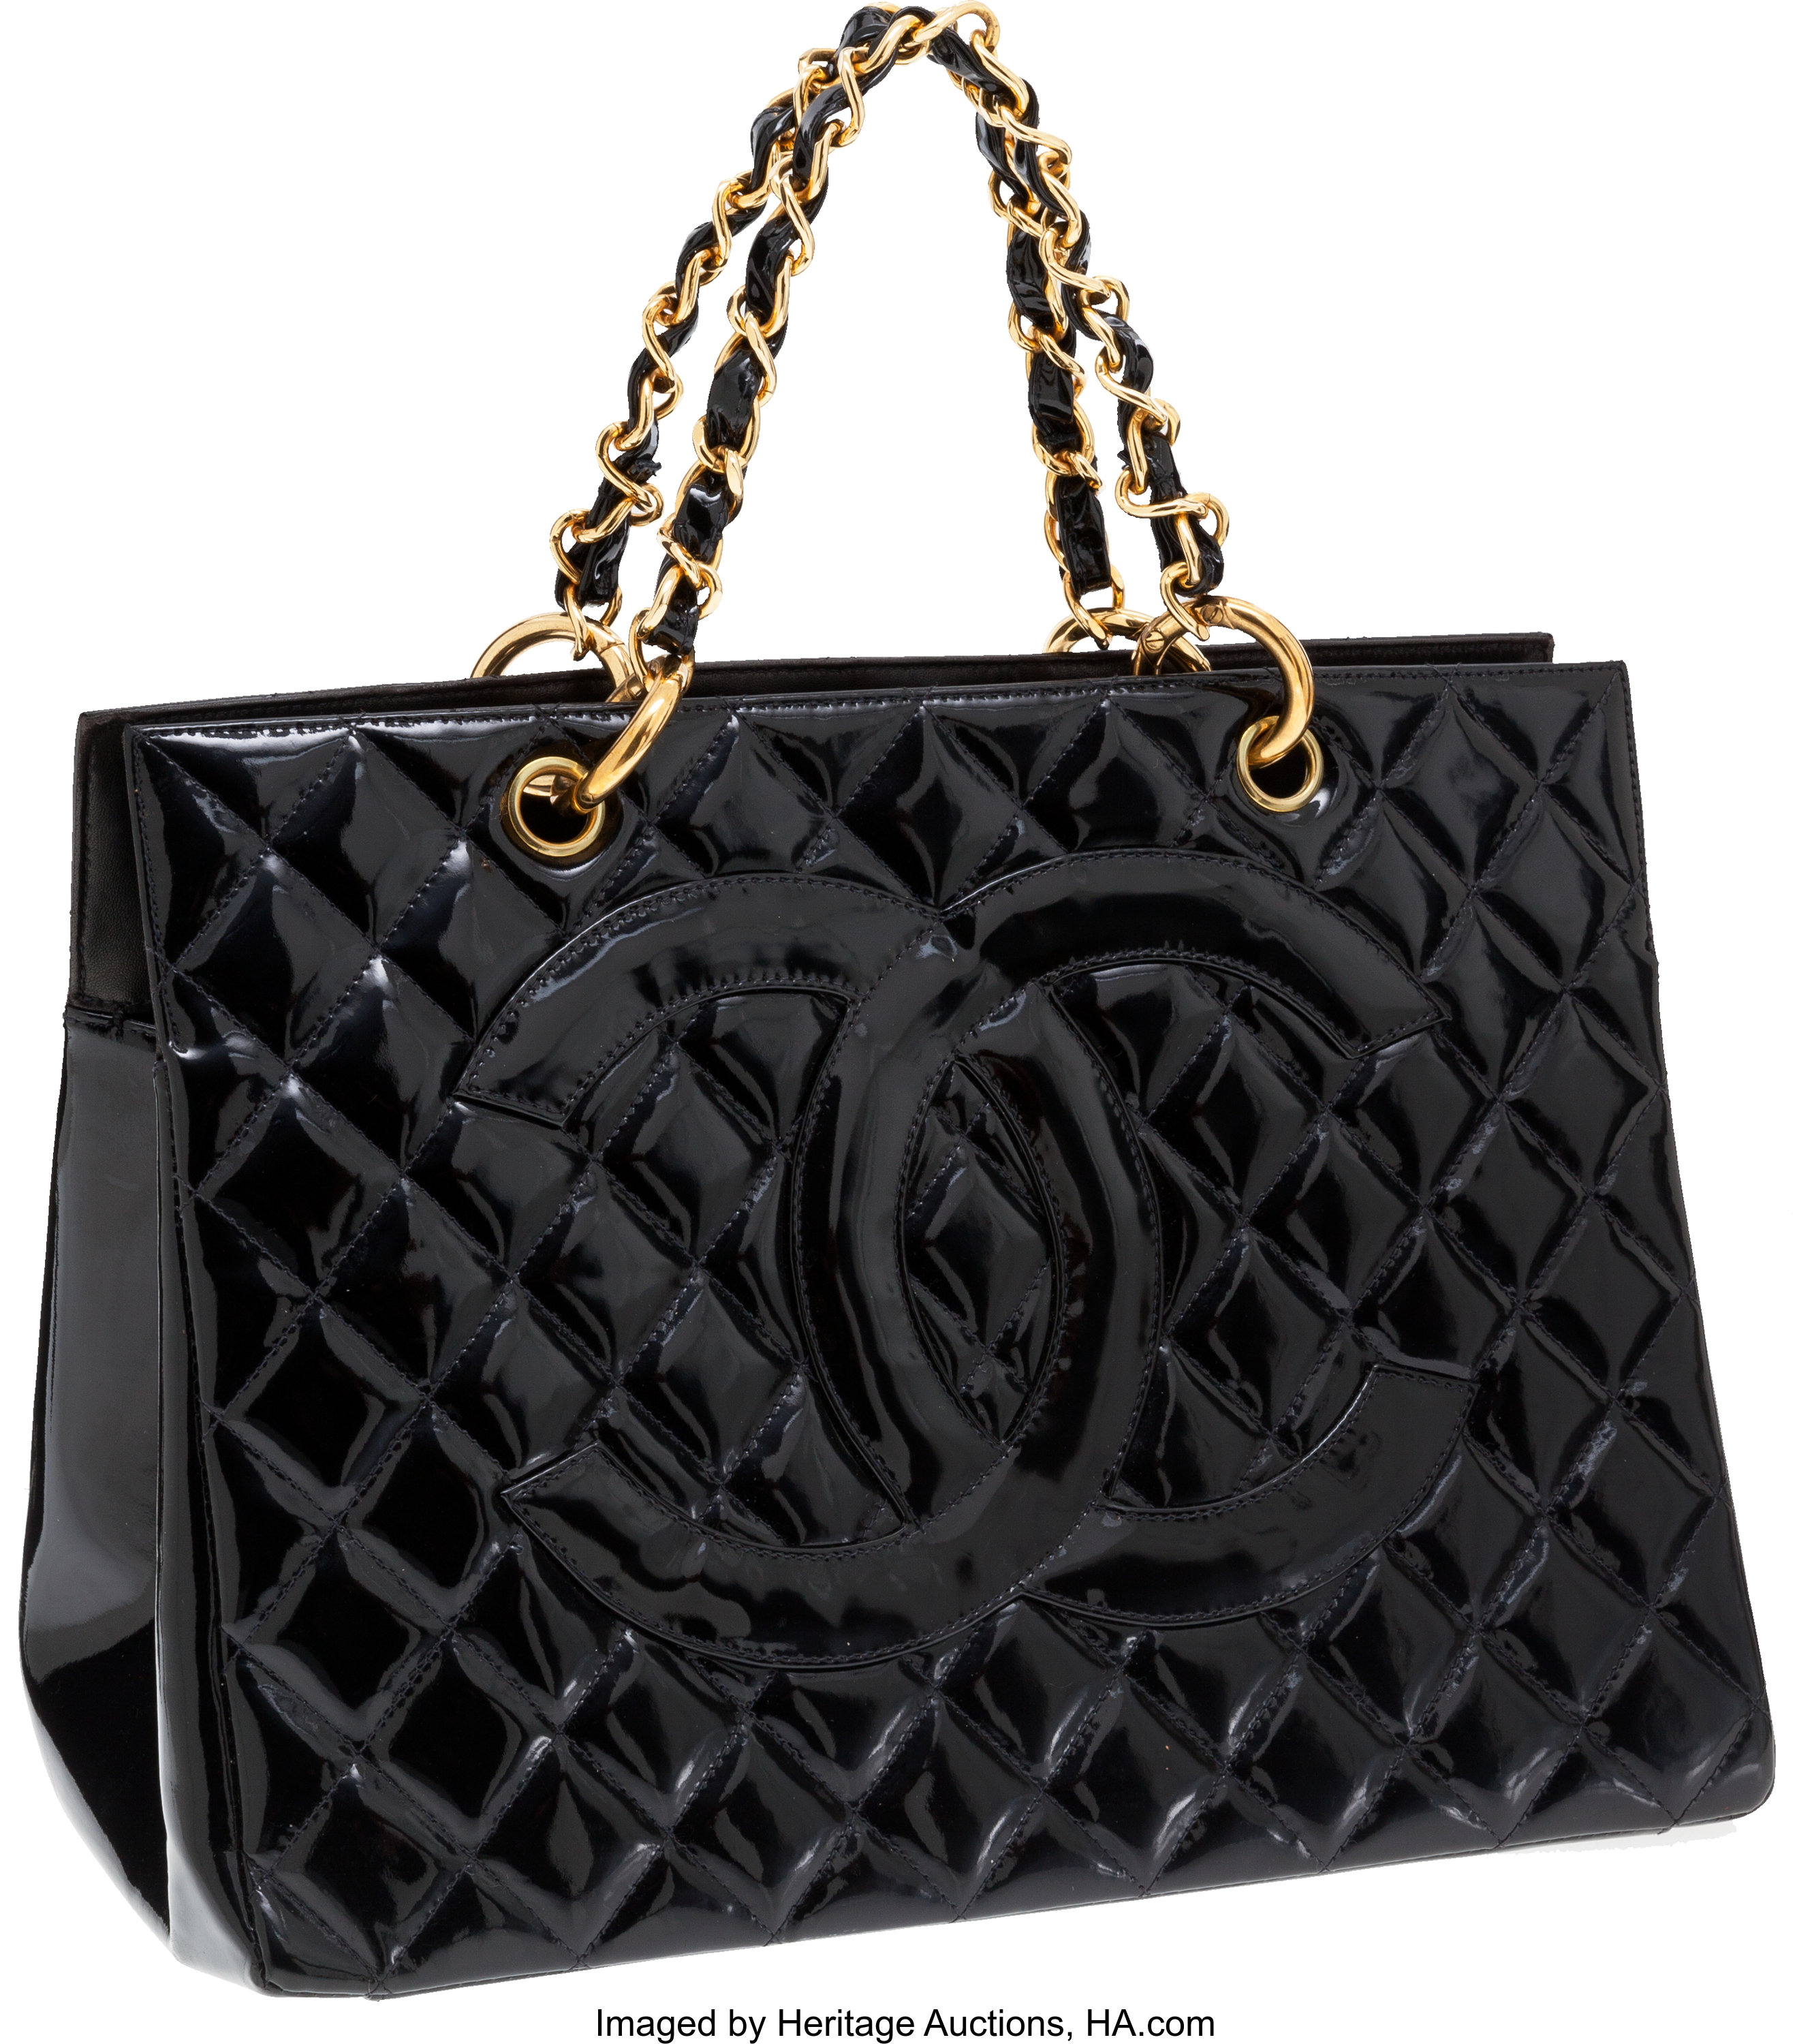 Chanel Black Quilted Patent Leather Large Tote Bag with Gold | Lot #56247 | Heritage Auctions